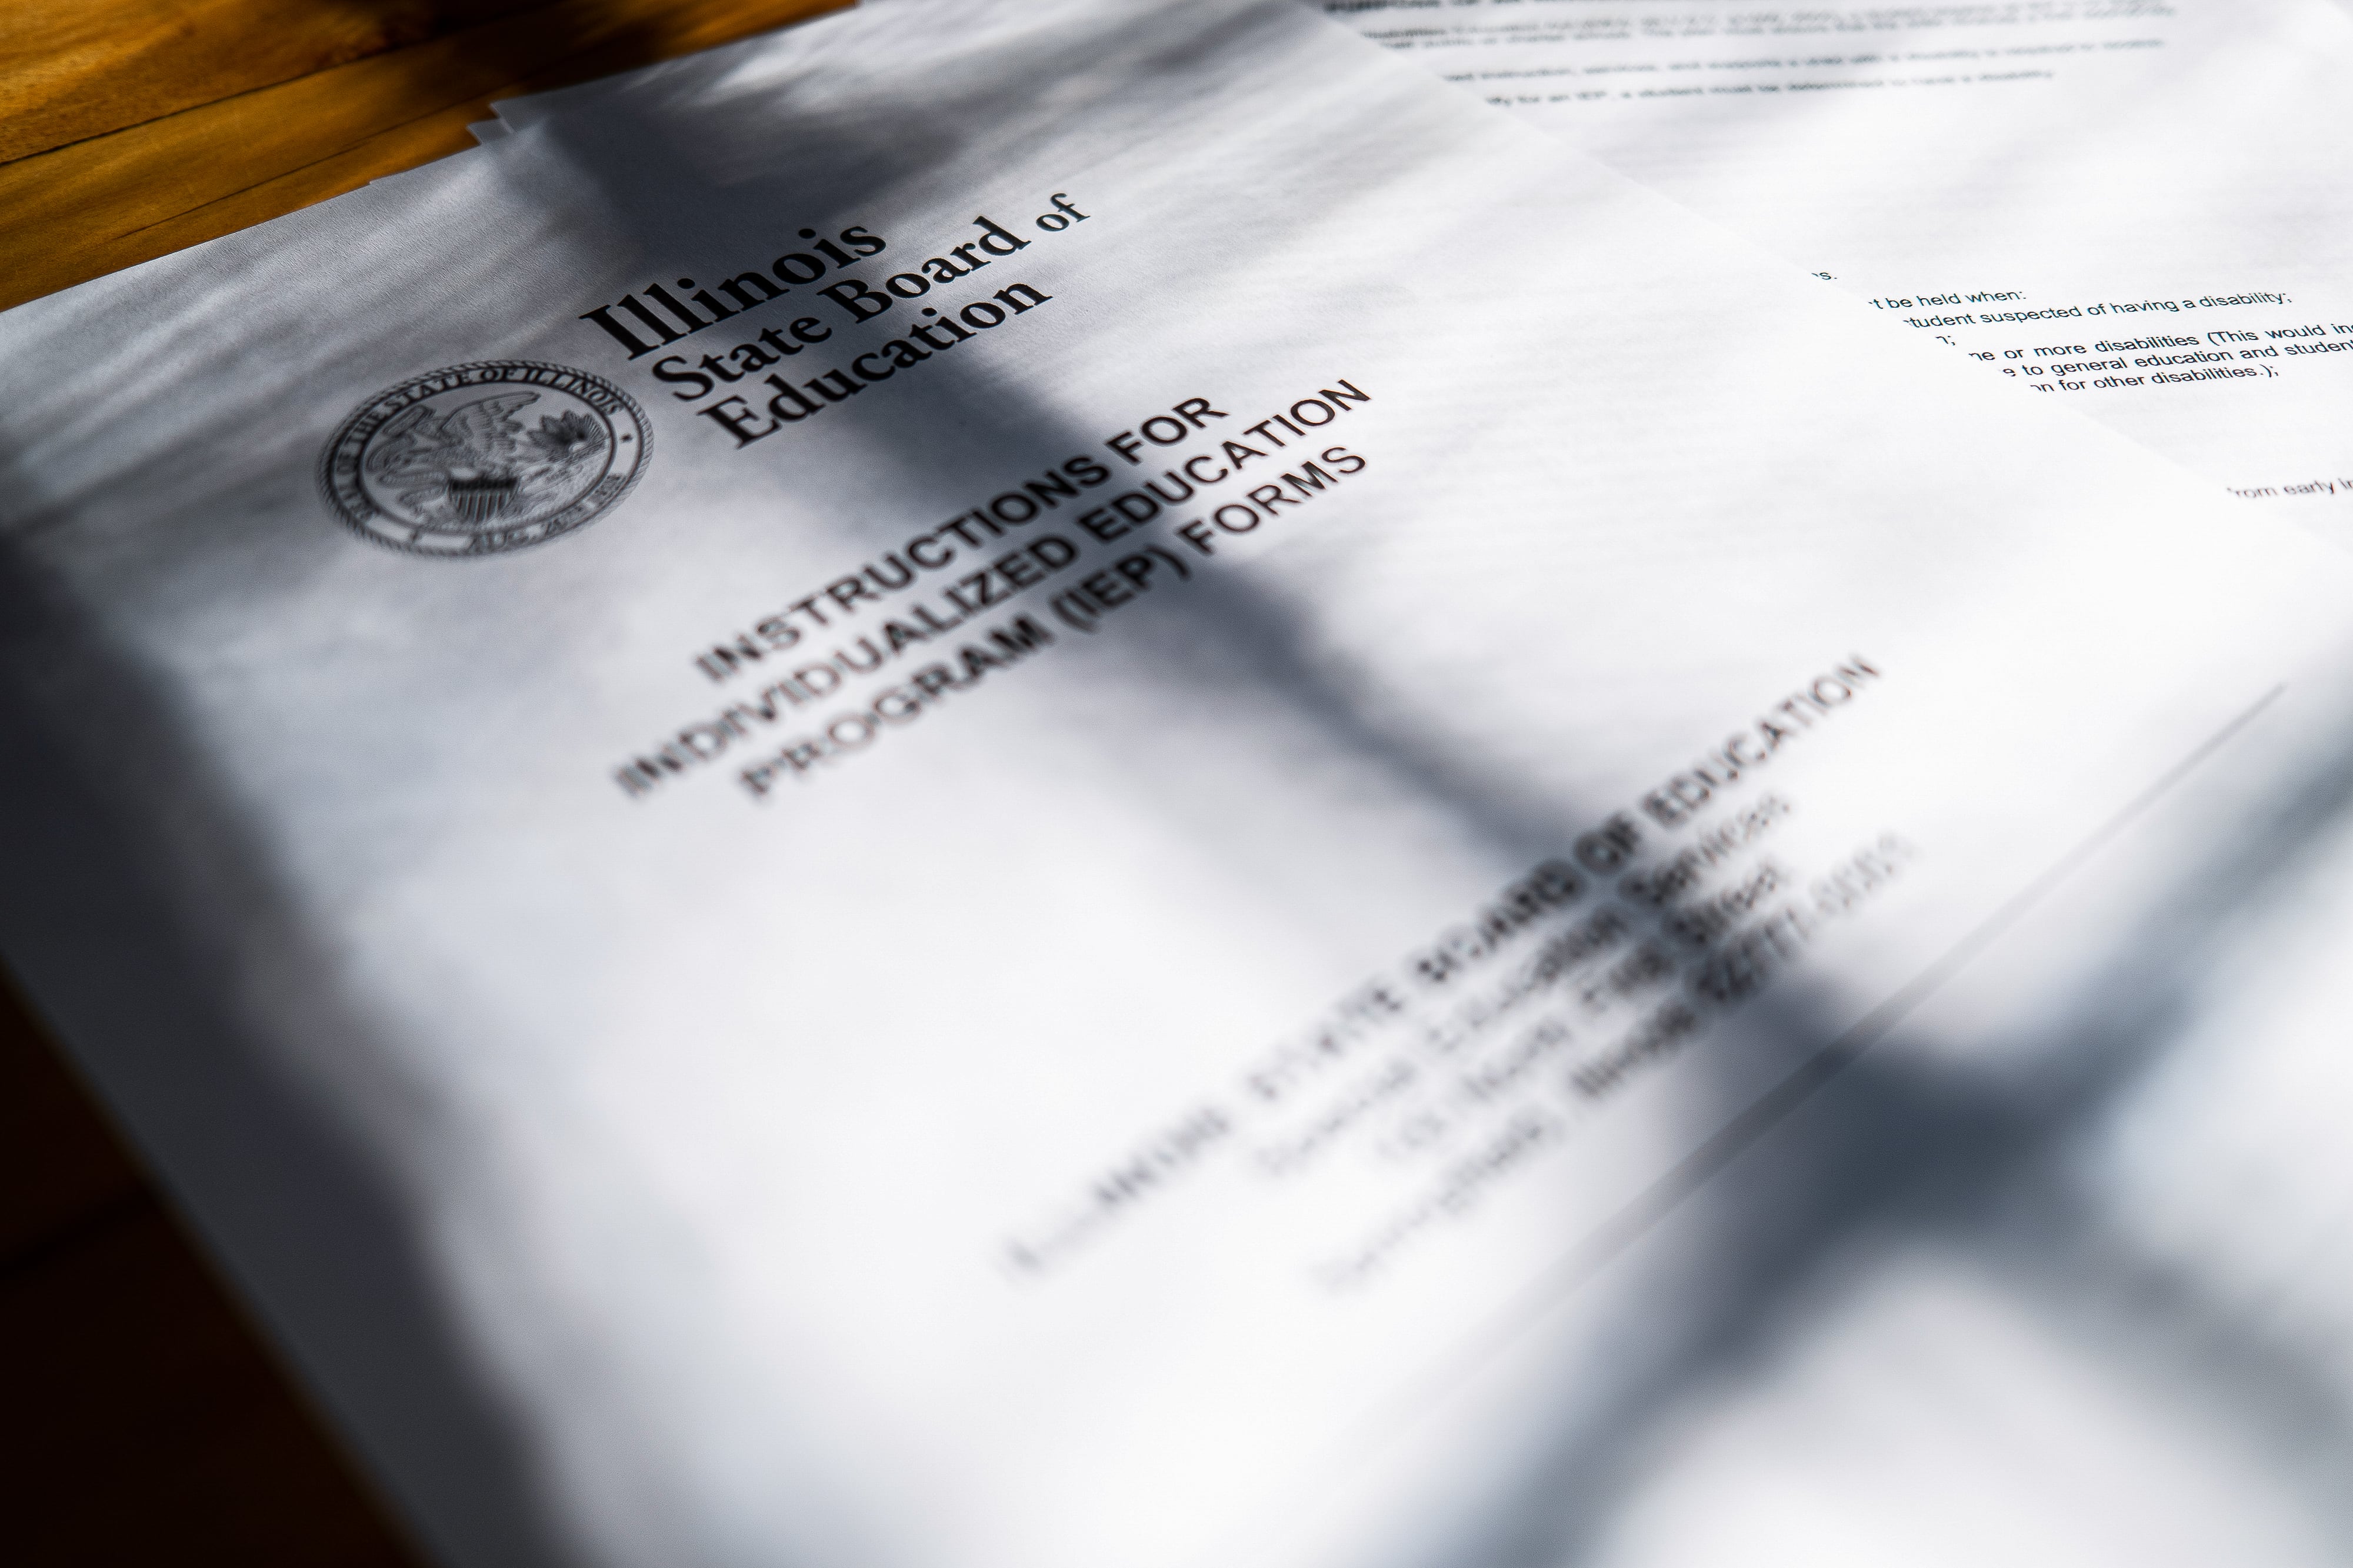 Informational documents from the Illinois State Board of Education on Individualized Education Program forms are partially obscured by shadows.